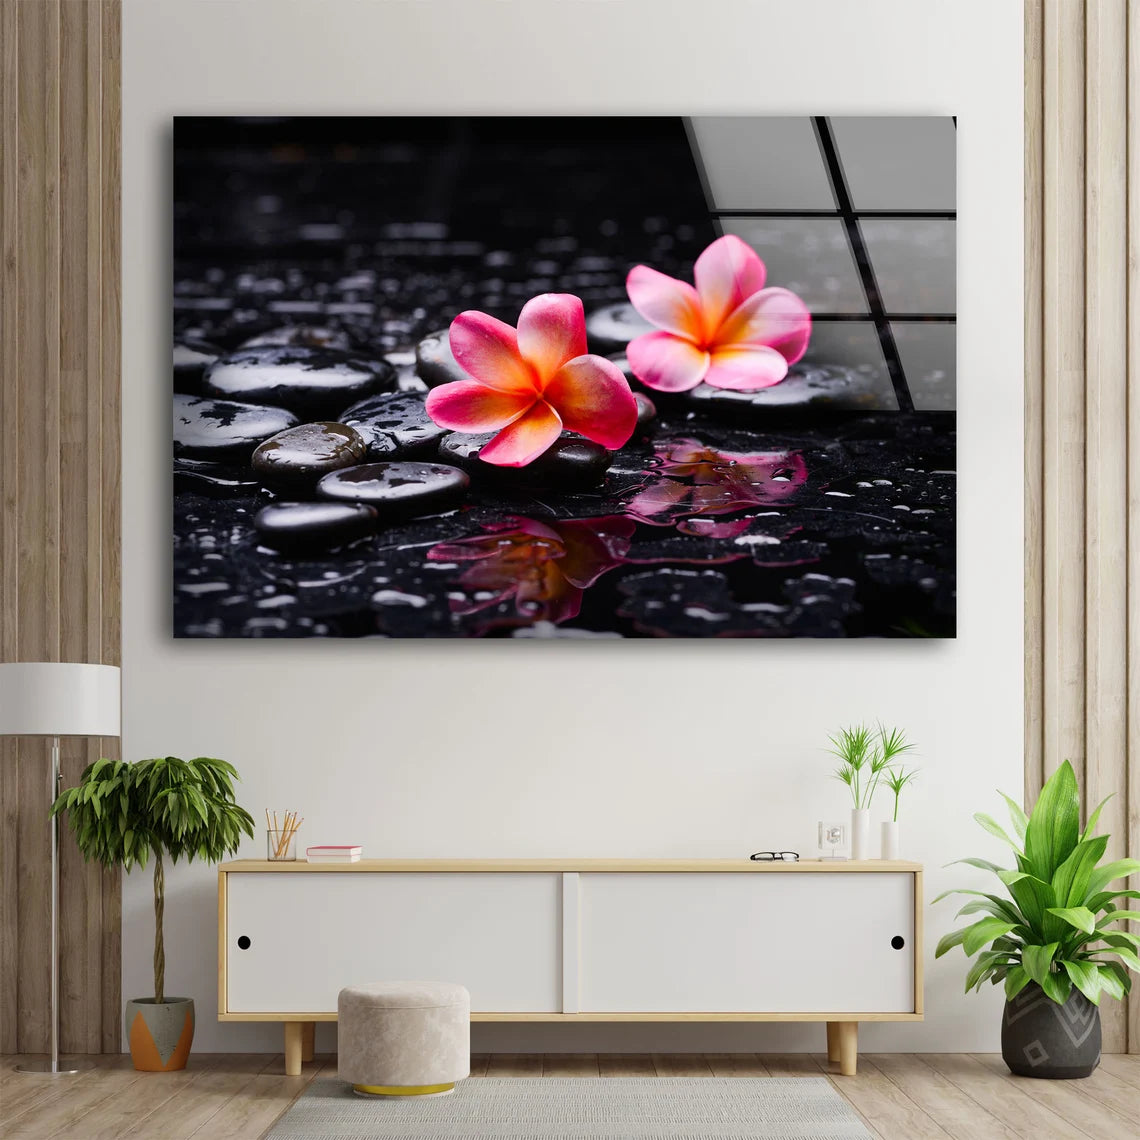 Zen Stones & Flowers Photograph Acrylic Glass Print Tempered Glass Wall Art 100% Made in Australia Ready to Hang